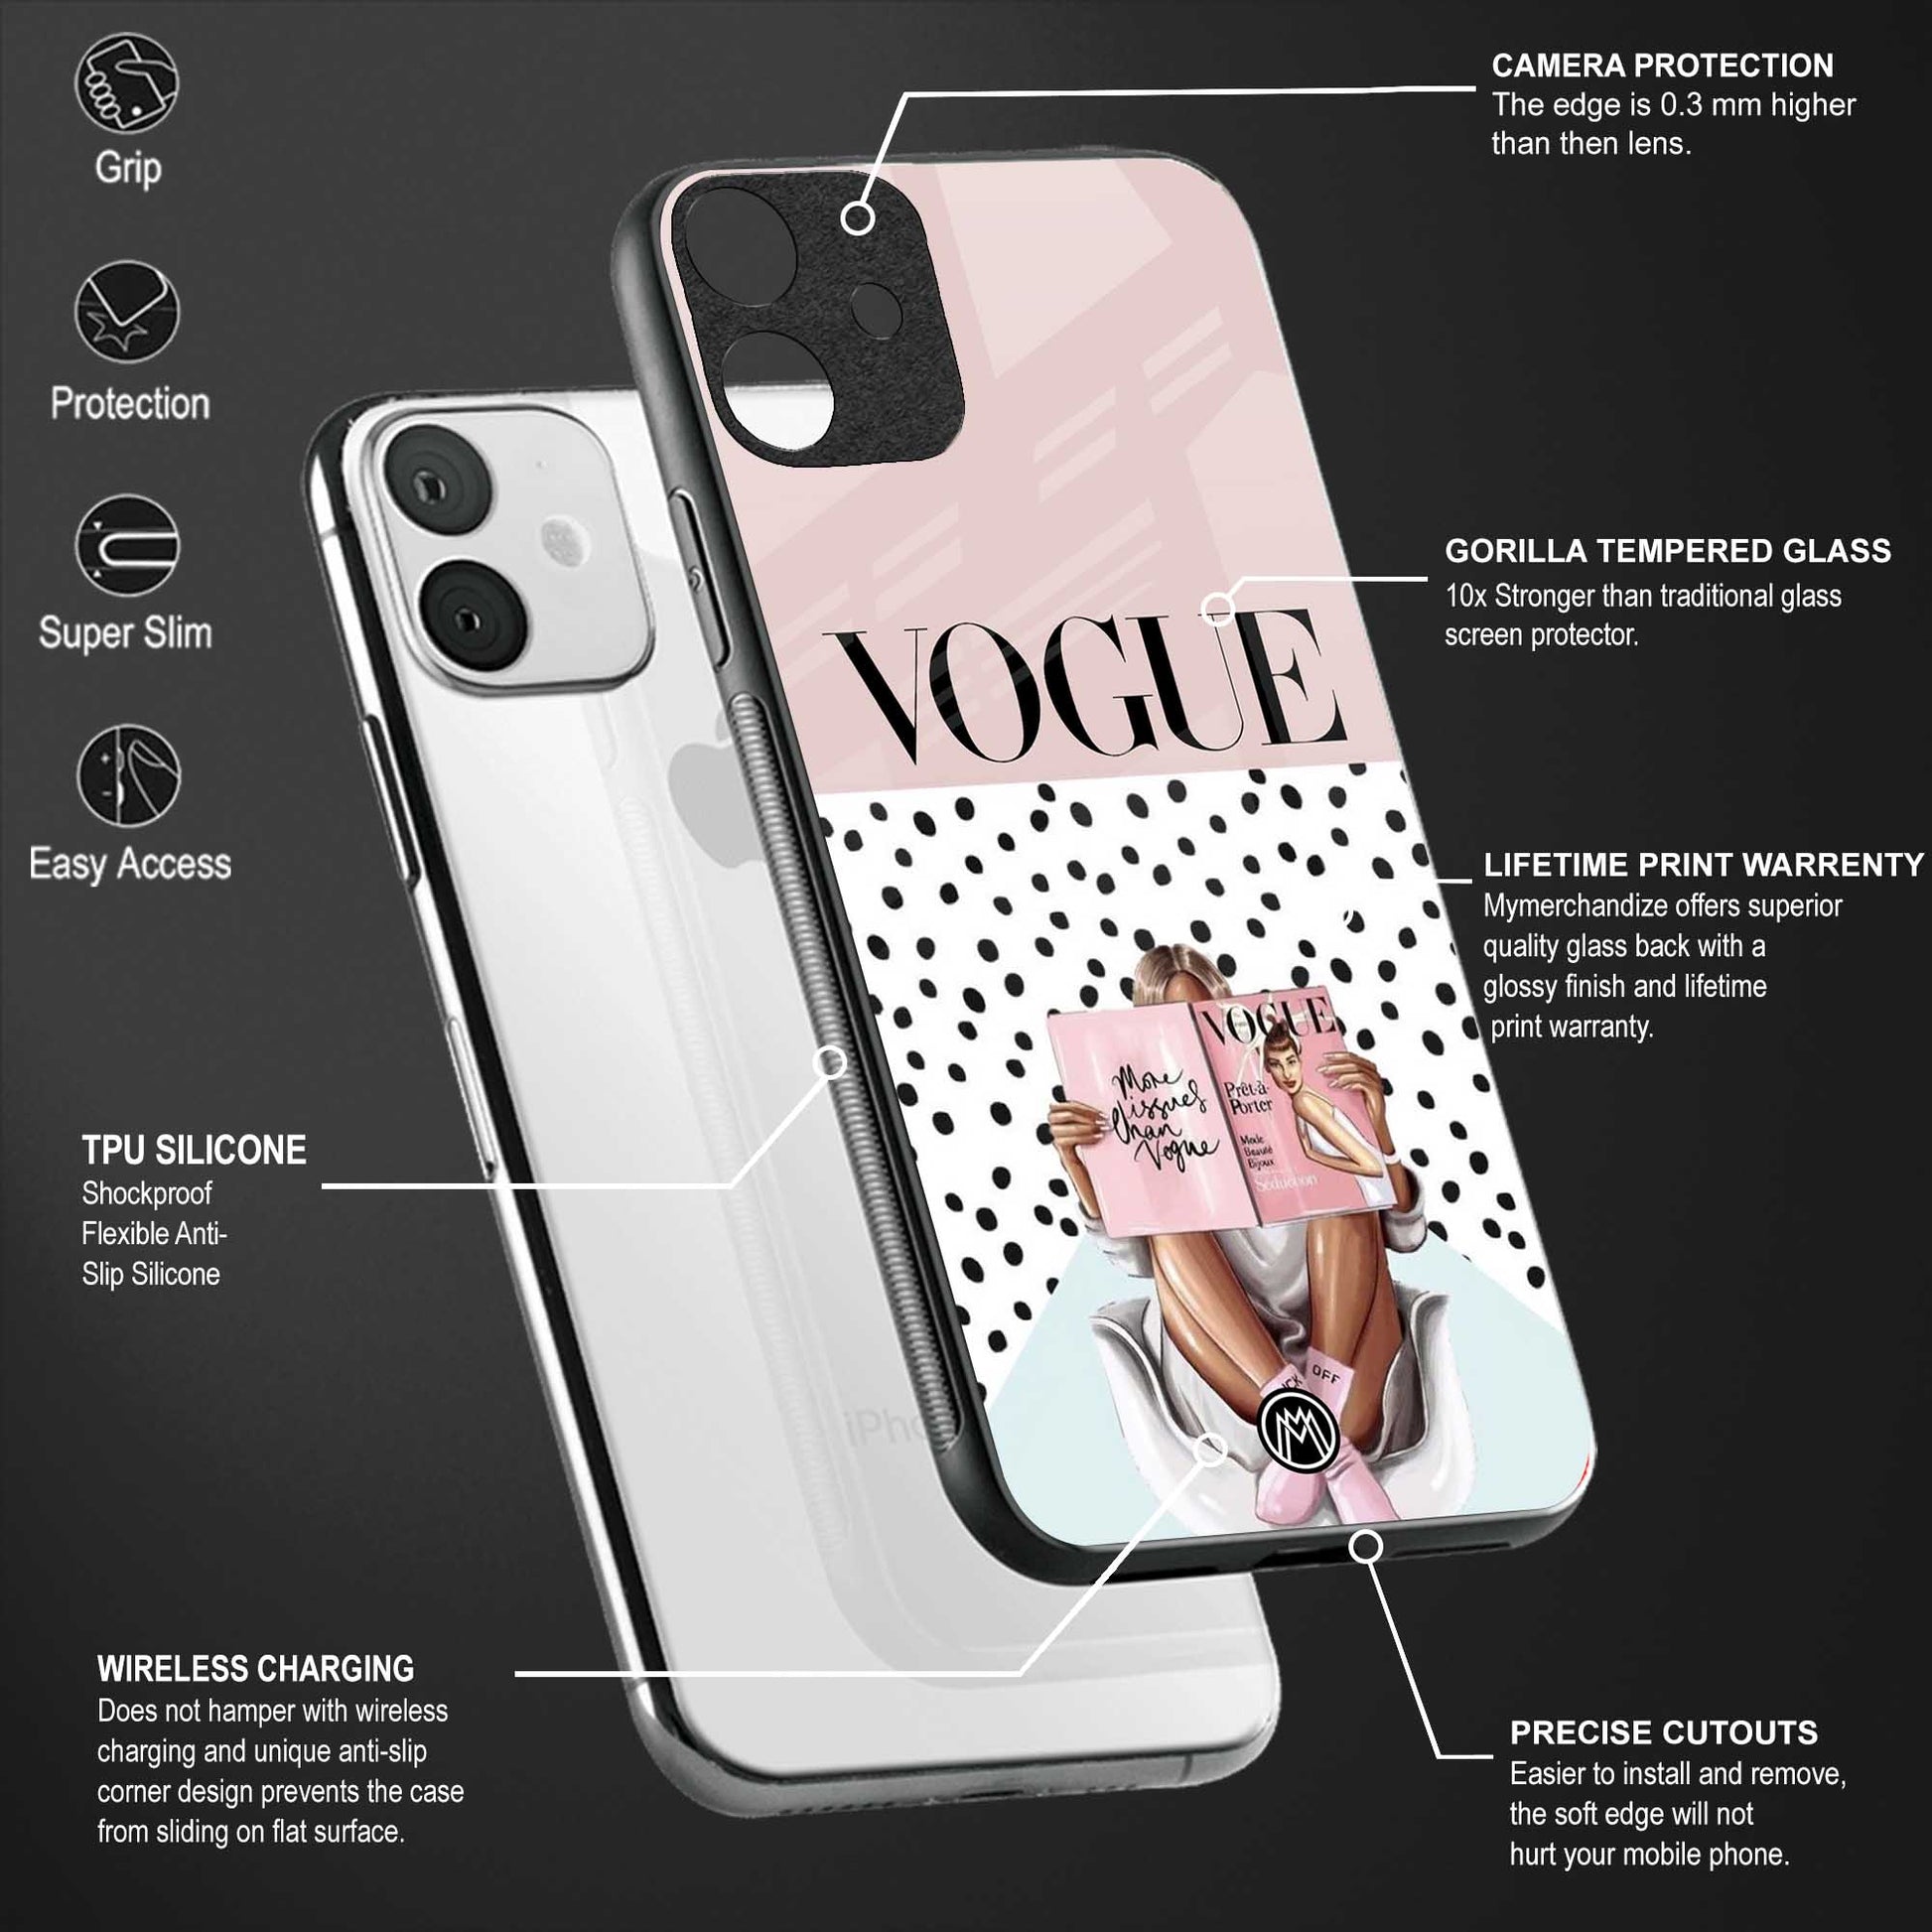 vogue queen glass case for samsung galaxy a7 2018 image-4